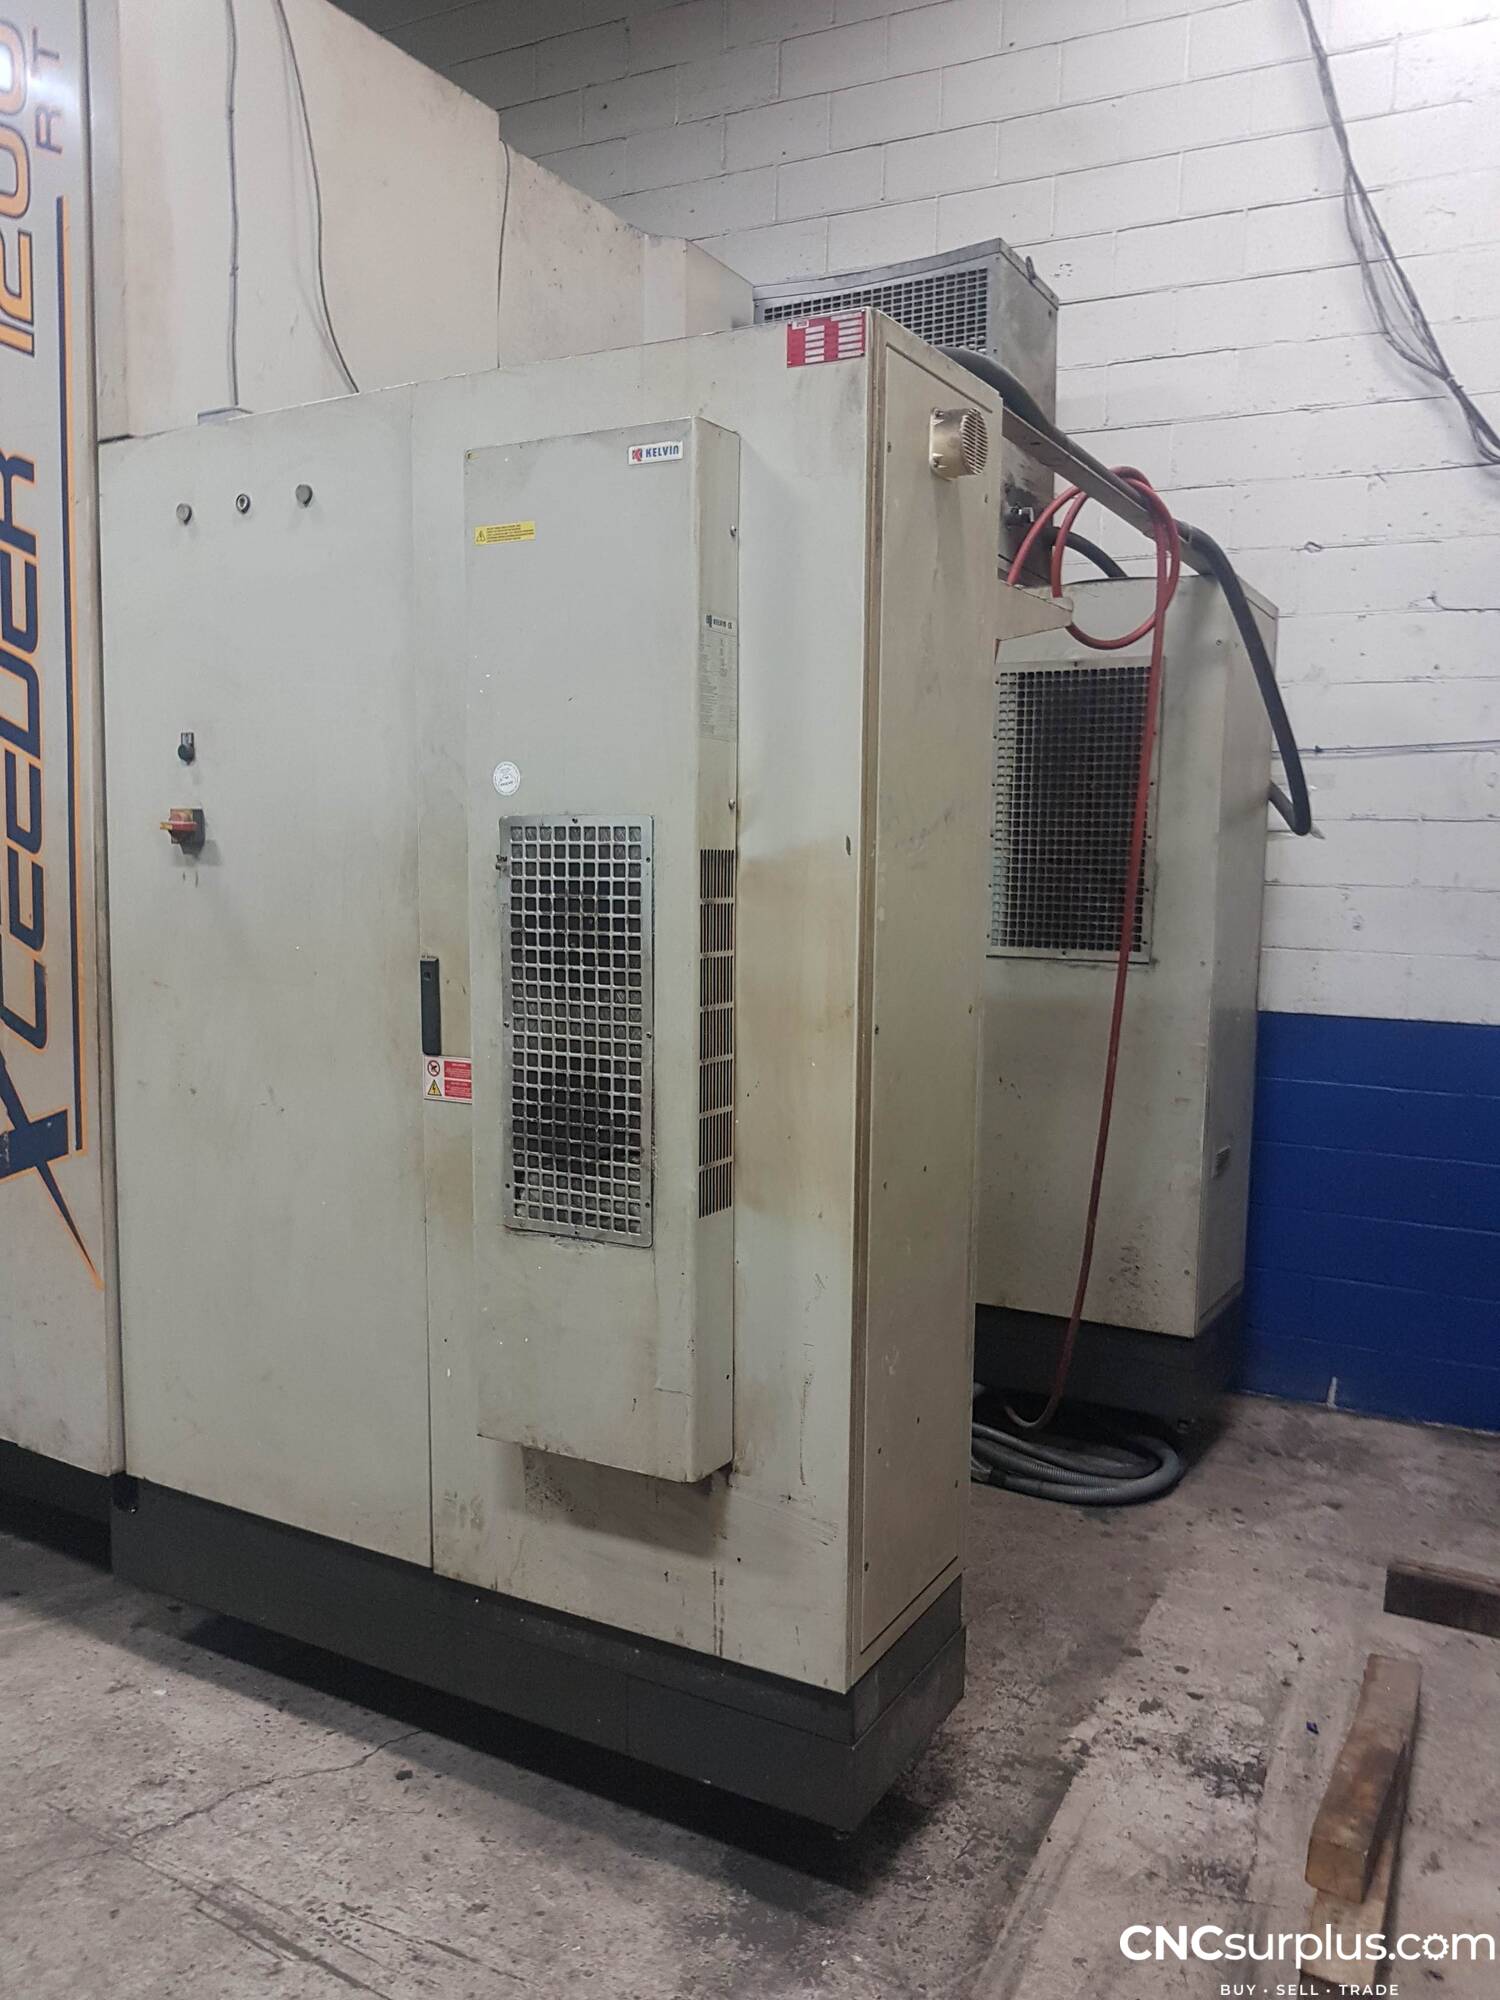 2001 BRETON XCEEDER 1200 RTHD Vertical Machining Centers (5-Axis or More) | CNCsurplus, A Div. of Comtex Leasing Corp.